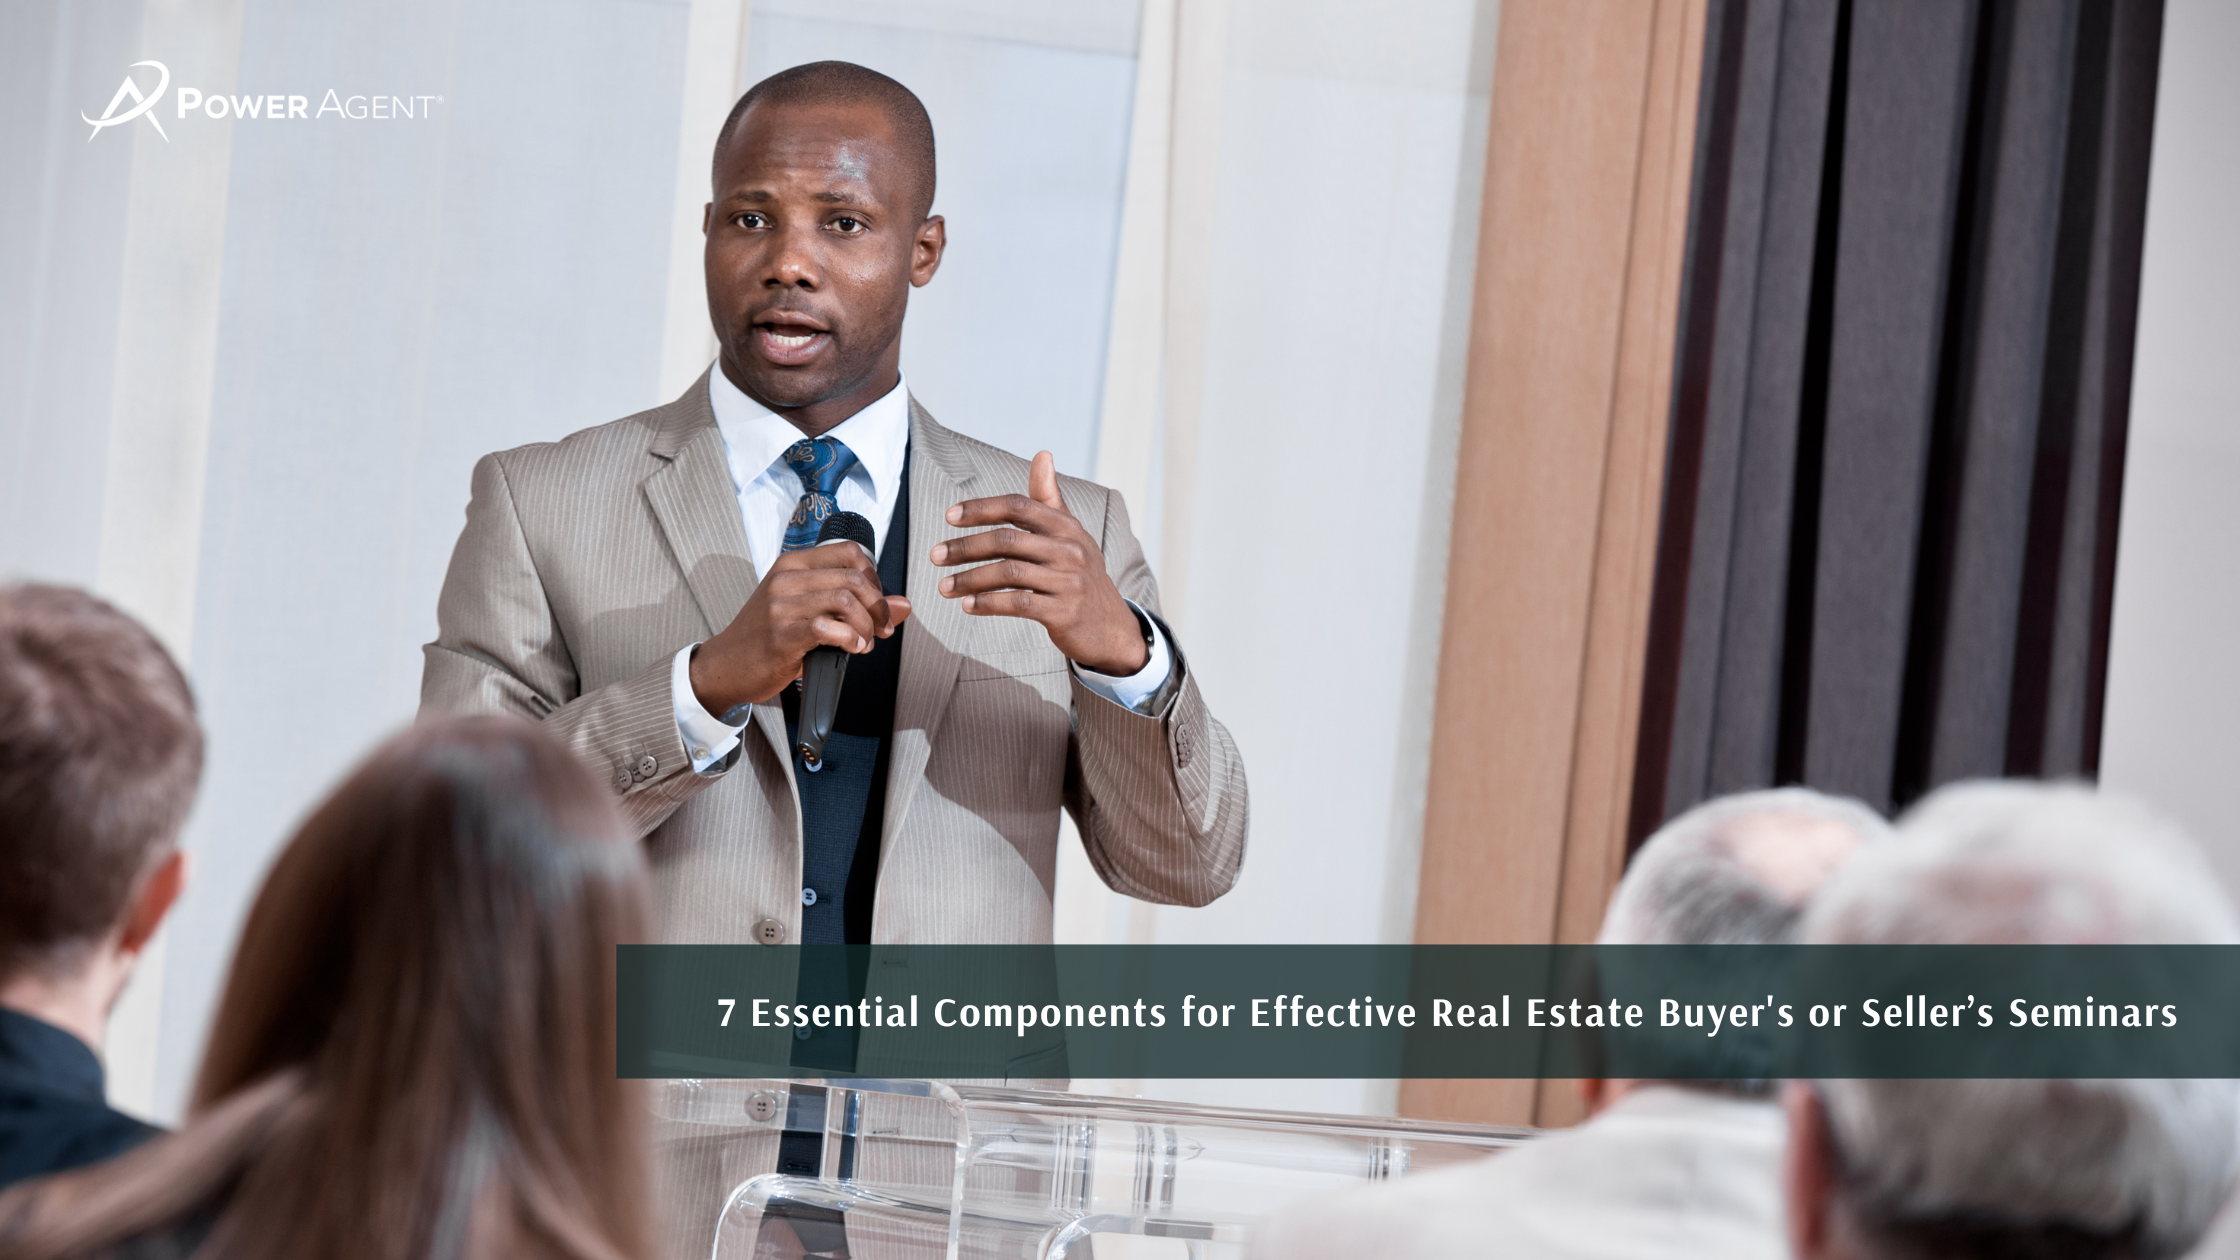 7 Essential Components for Effective Real Estate Buyer's or Seller’s Seminars